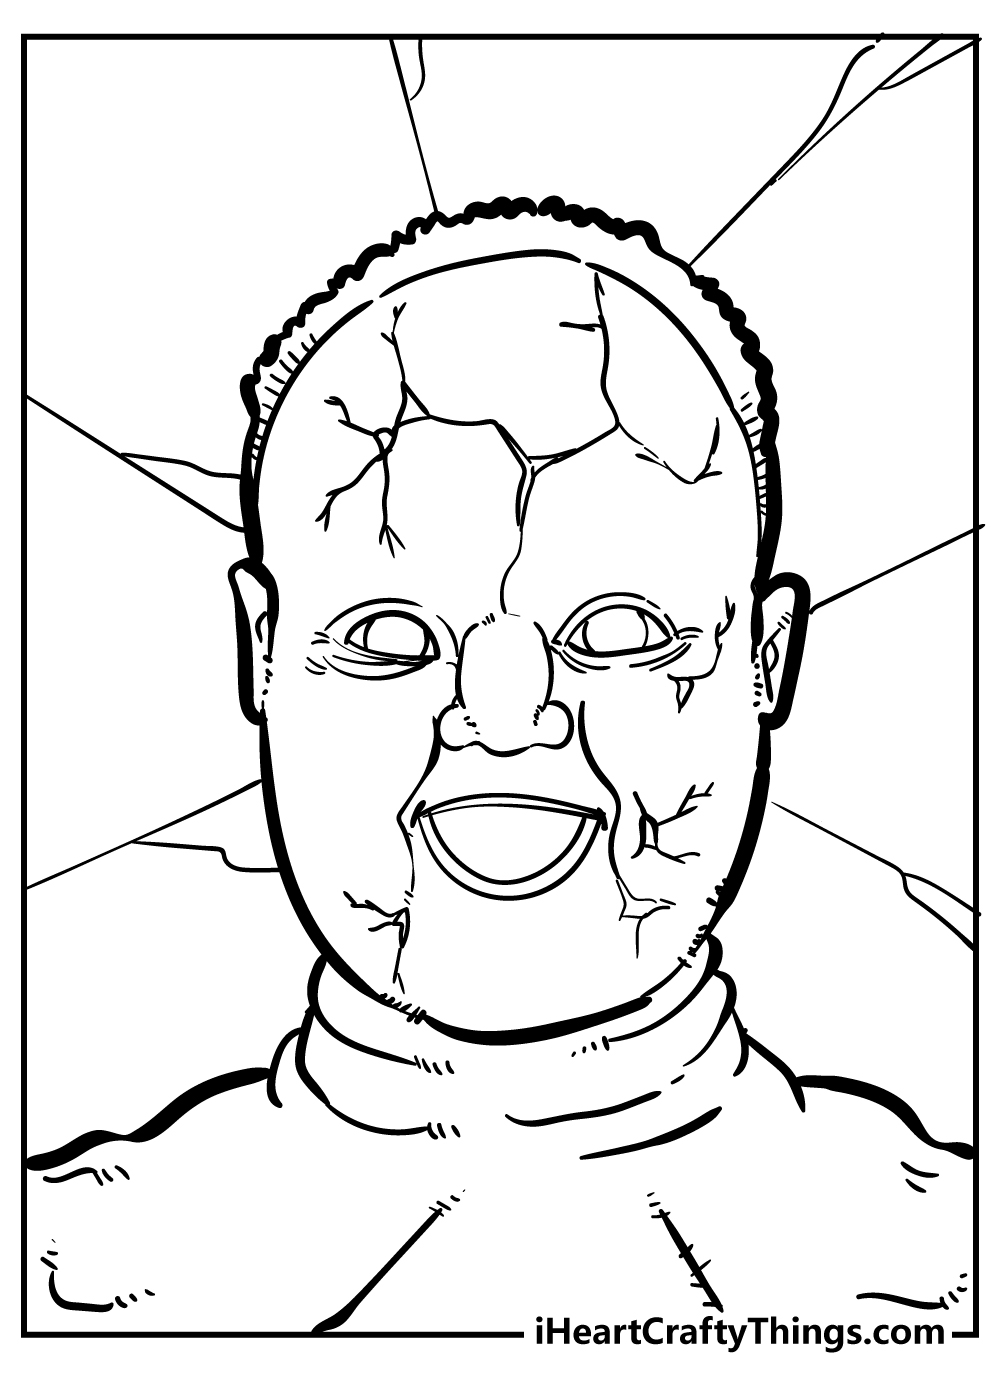 Creepy Coloring Pages free pdf download